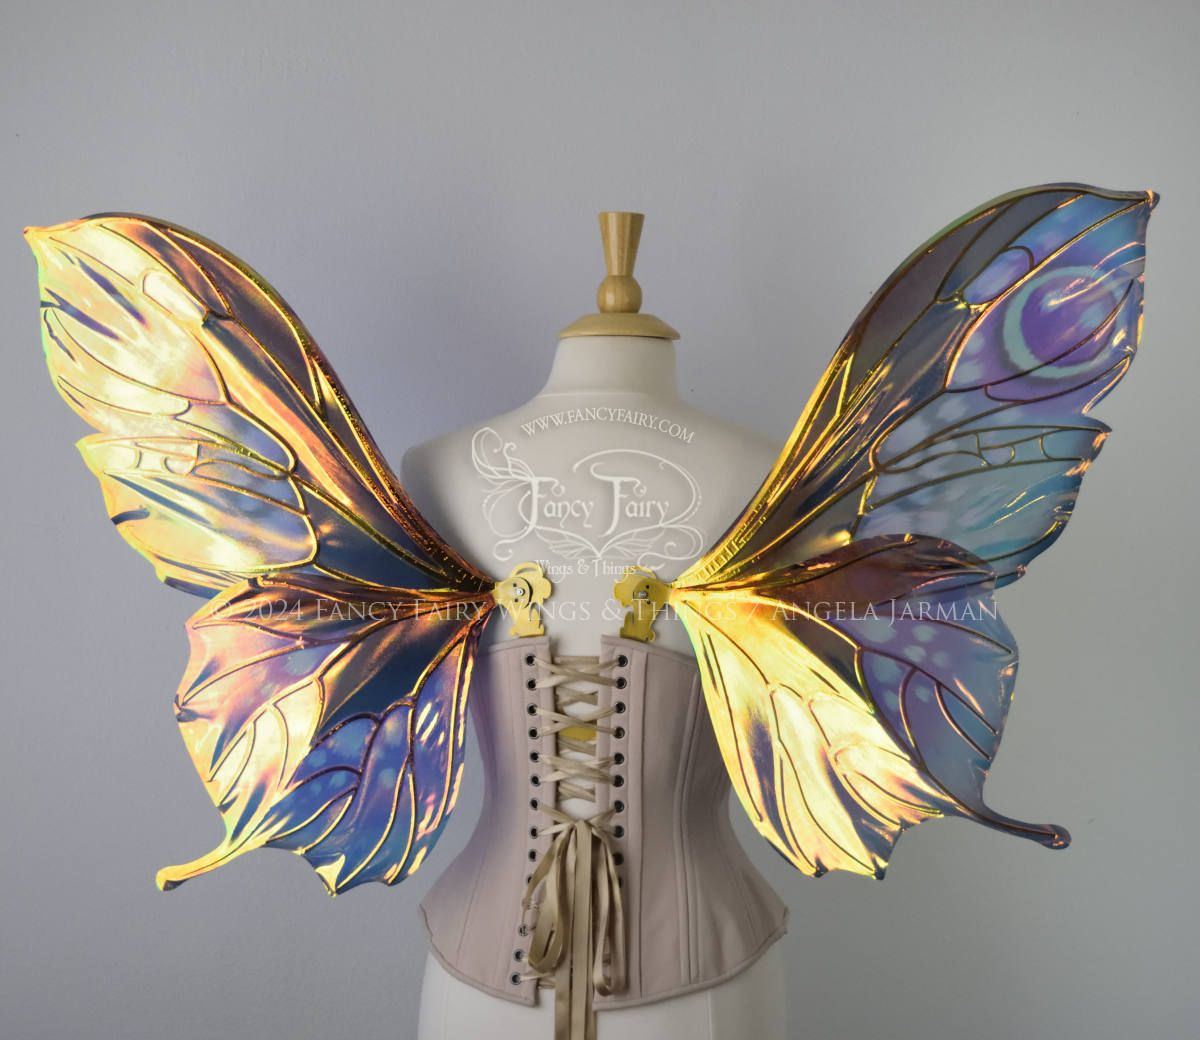 Back view of butterfly shaped iridescent wings in shades of teal with pink and lavender accents with gold veins, worn on a dressform